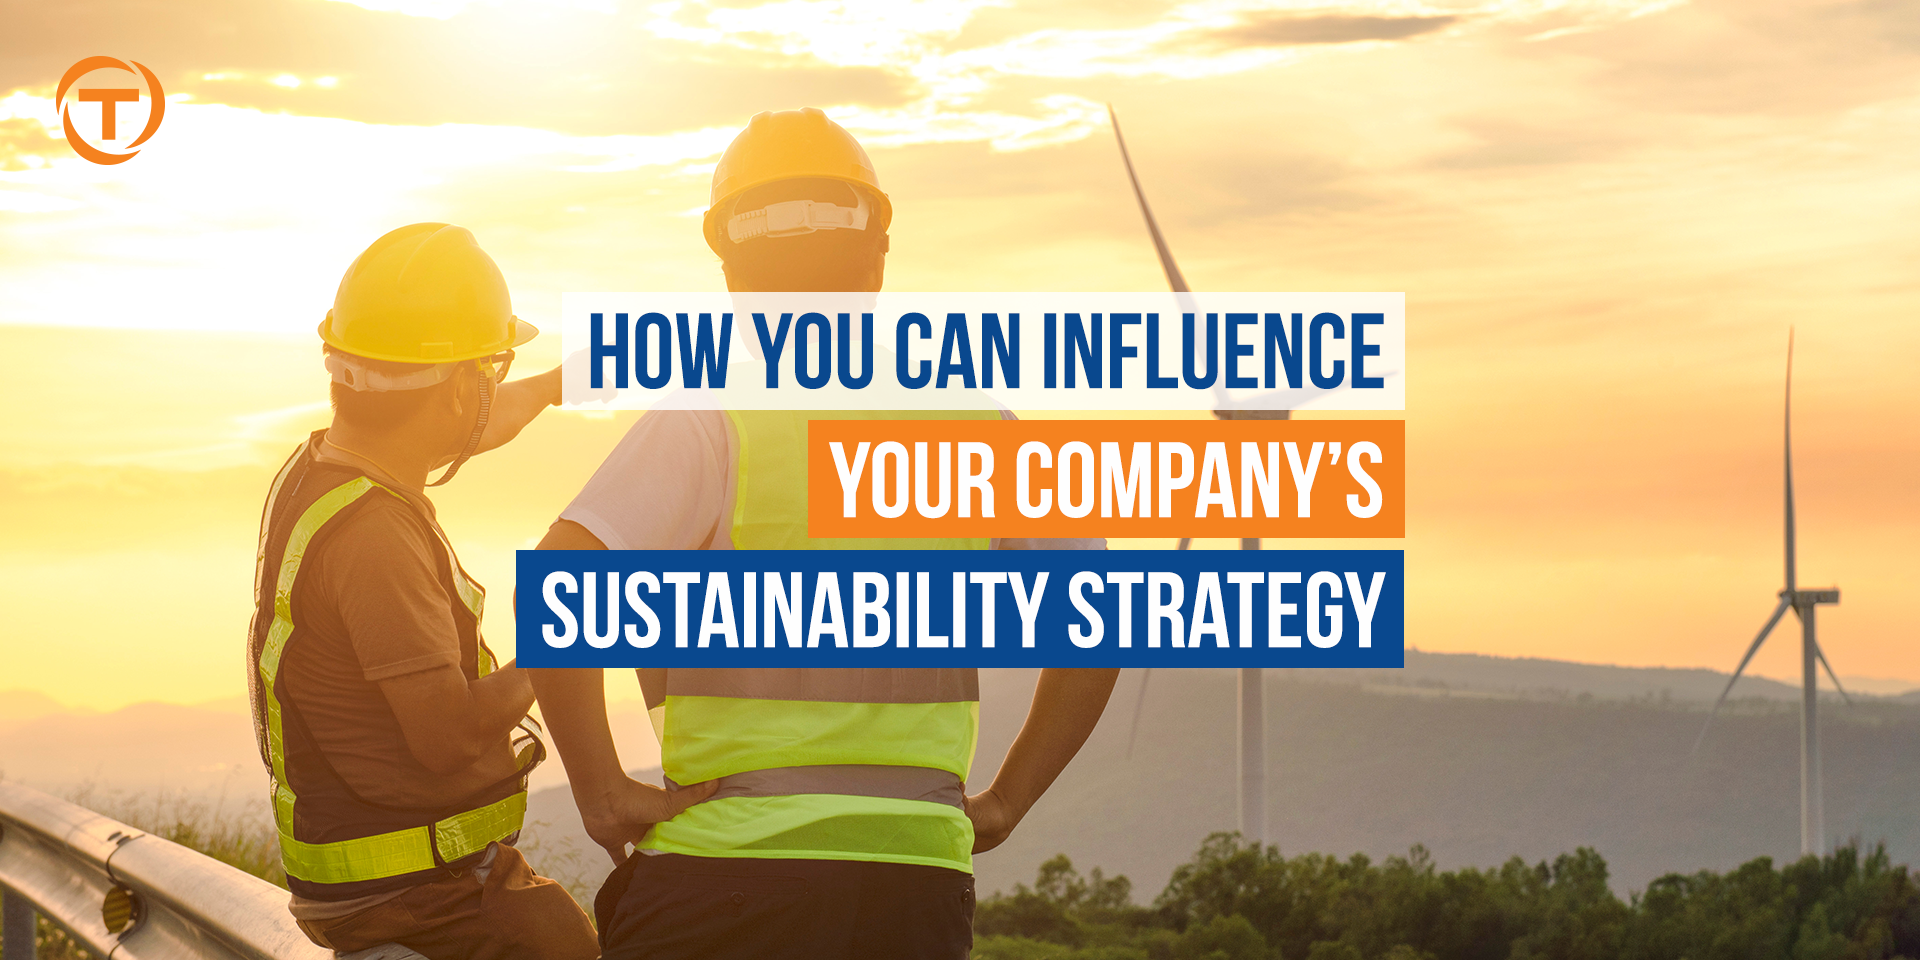 Blog [06 June] How You Can Influence Your Companys Sustainability Strategy